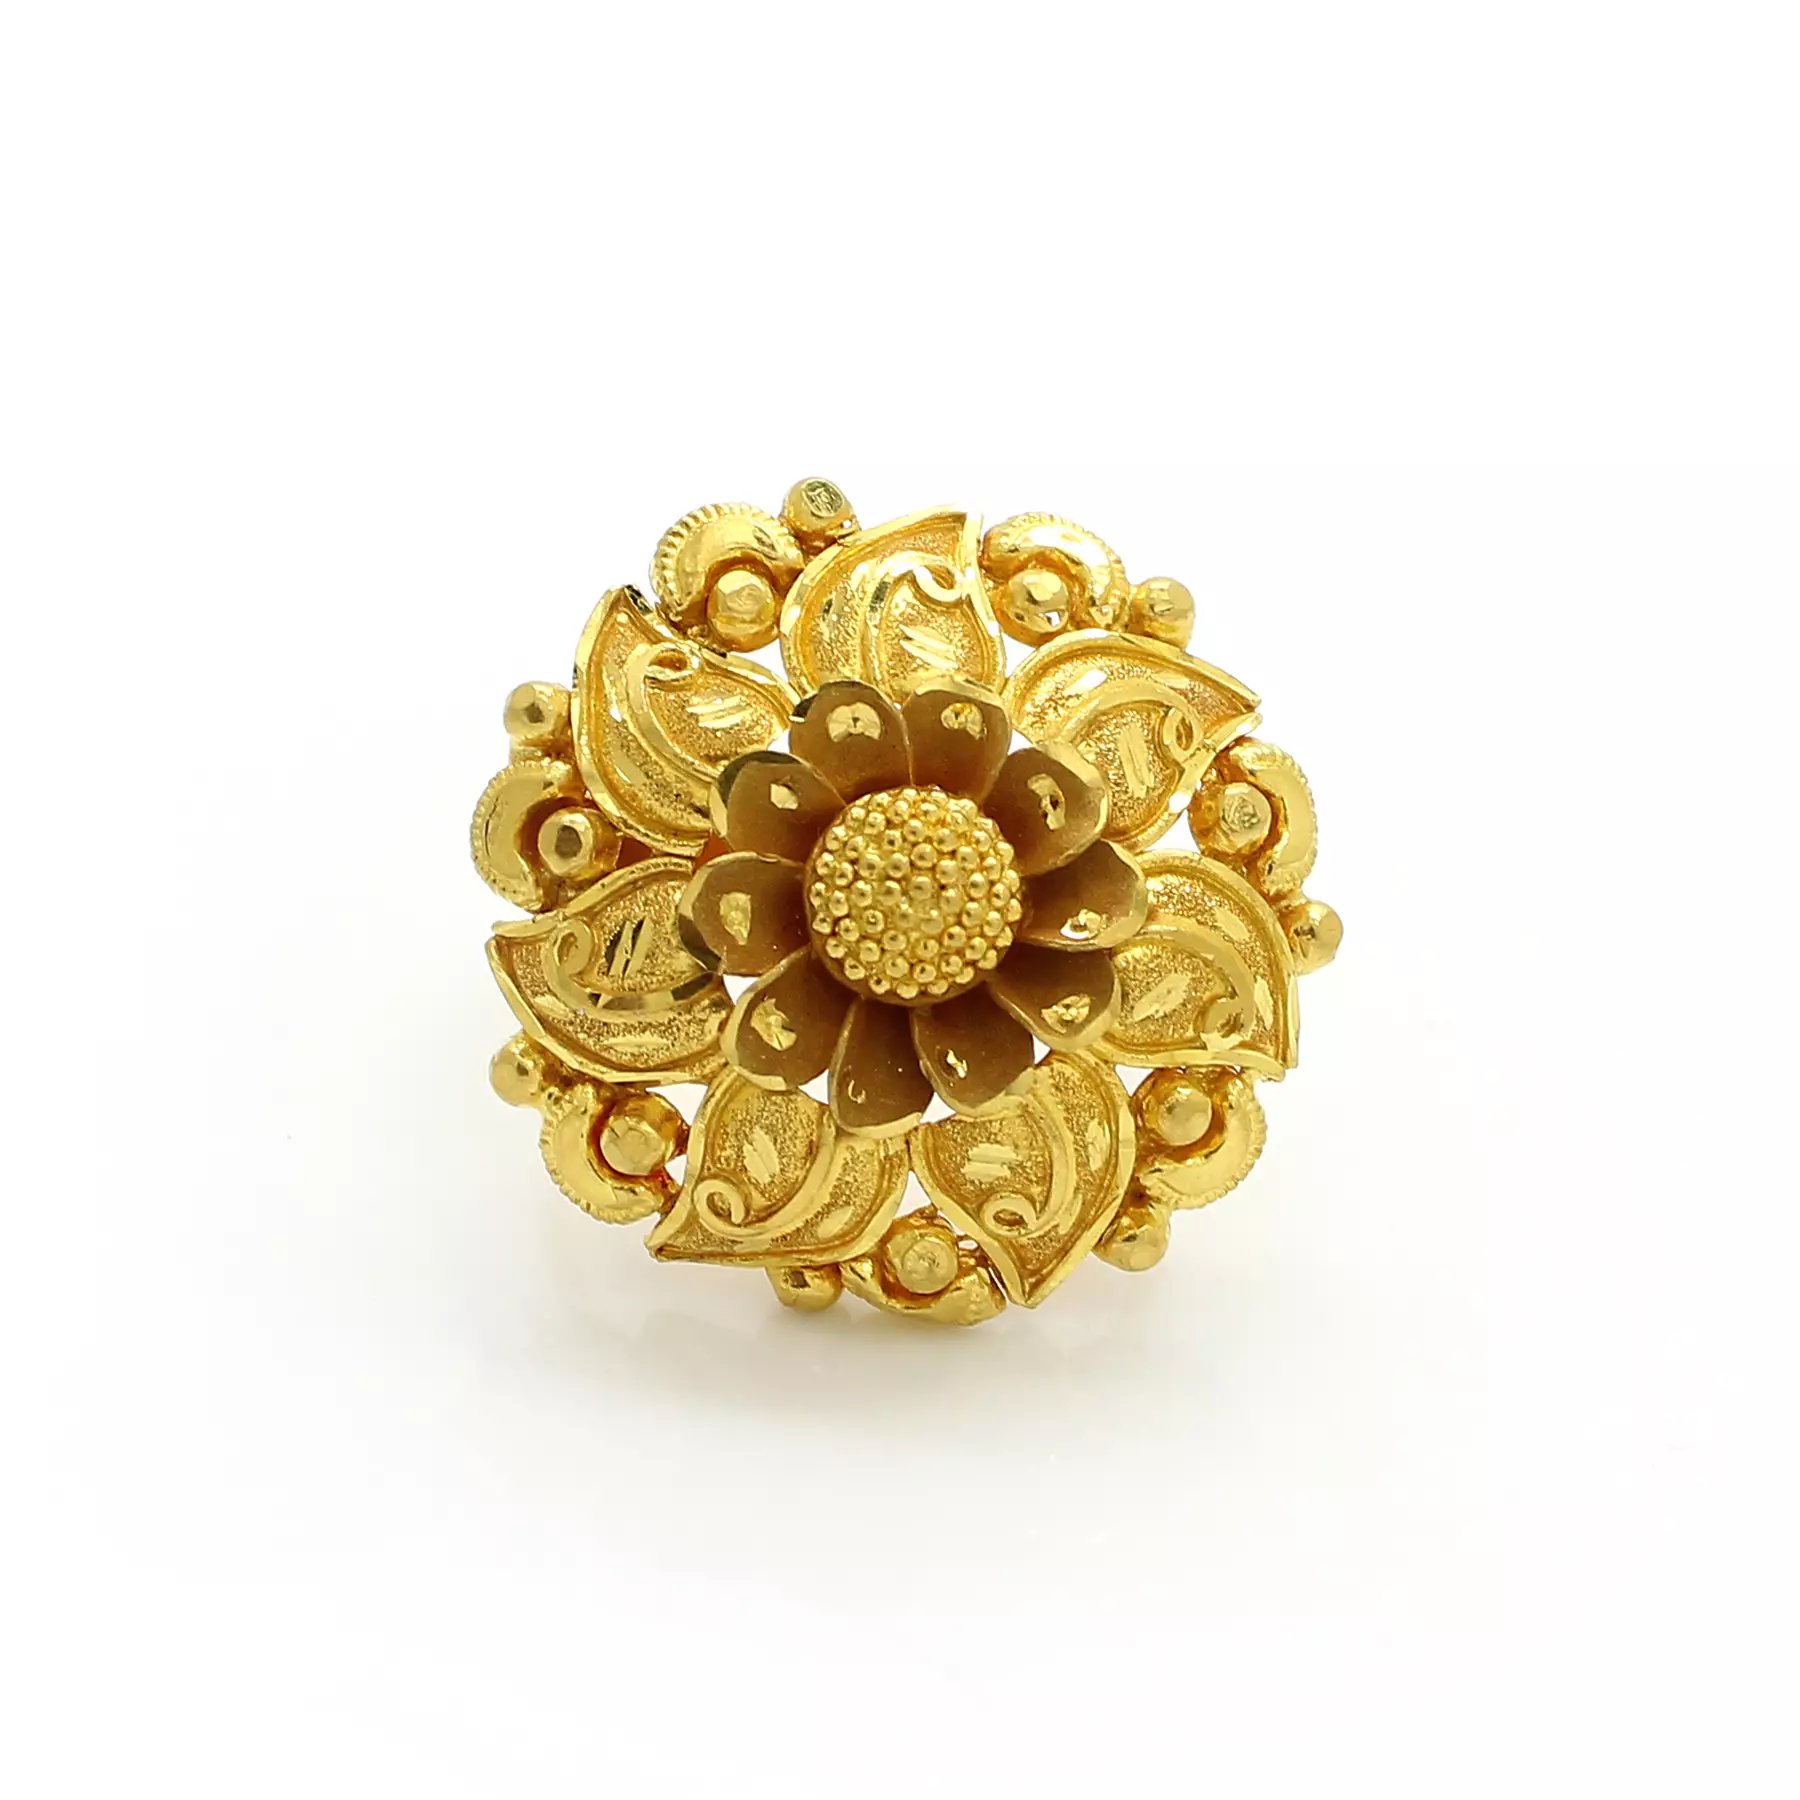 Hand ring made in nepal by jewellers | Hand ring, Jewelry, Jewels